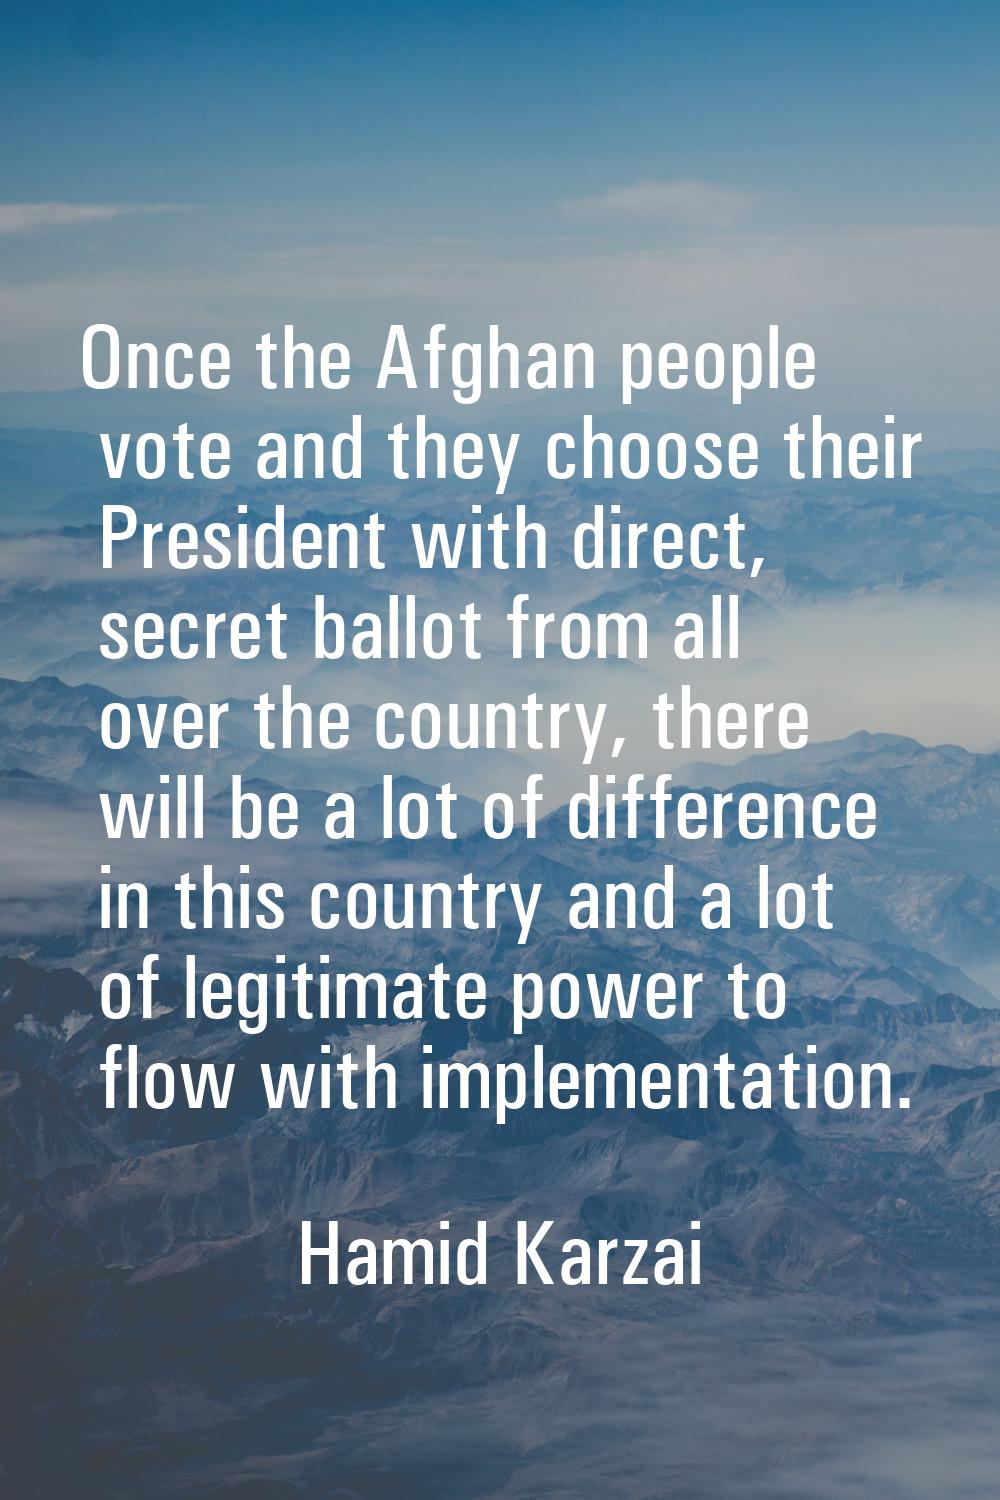 Once the Afghan people vote and they choose their President with direct, secret ballot from all ove